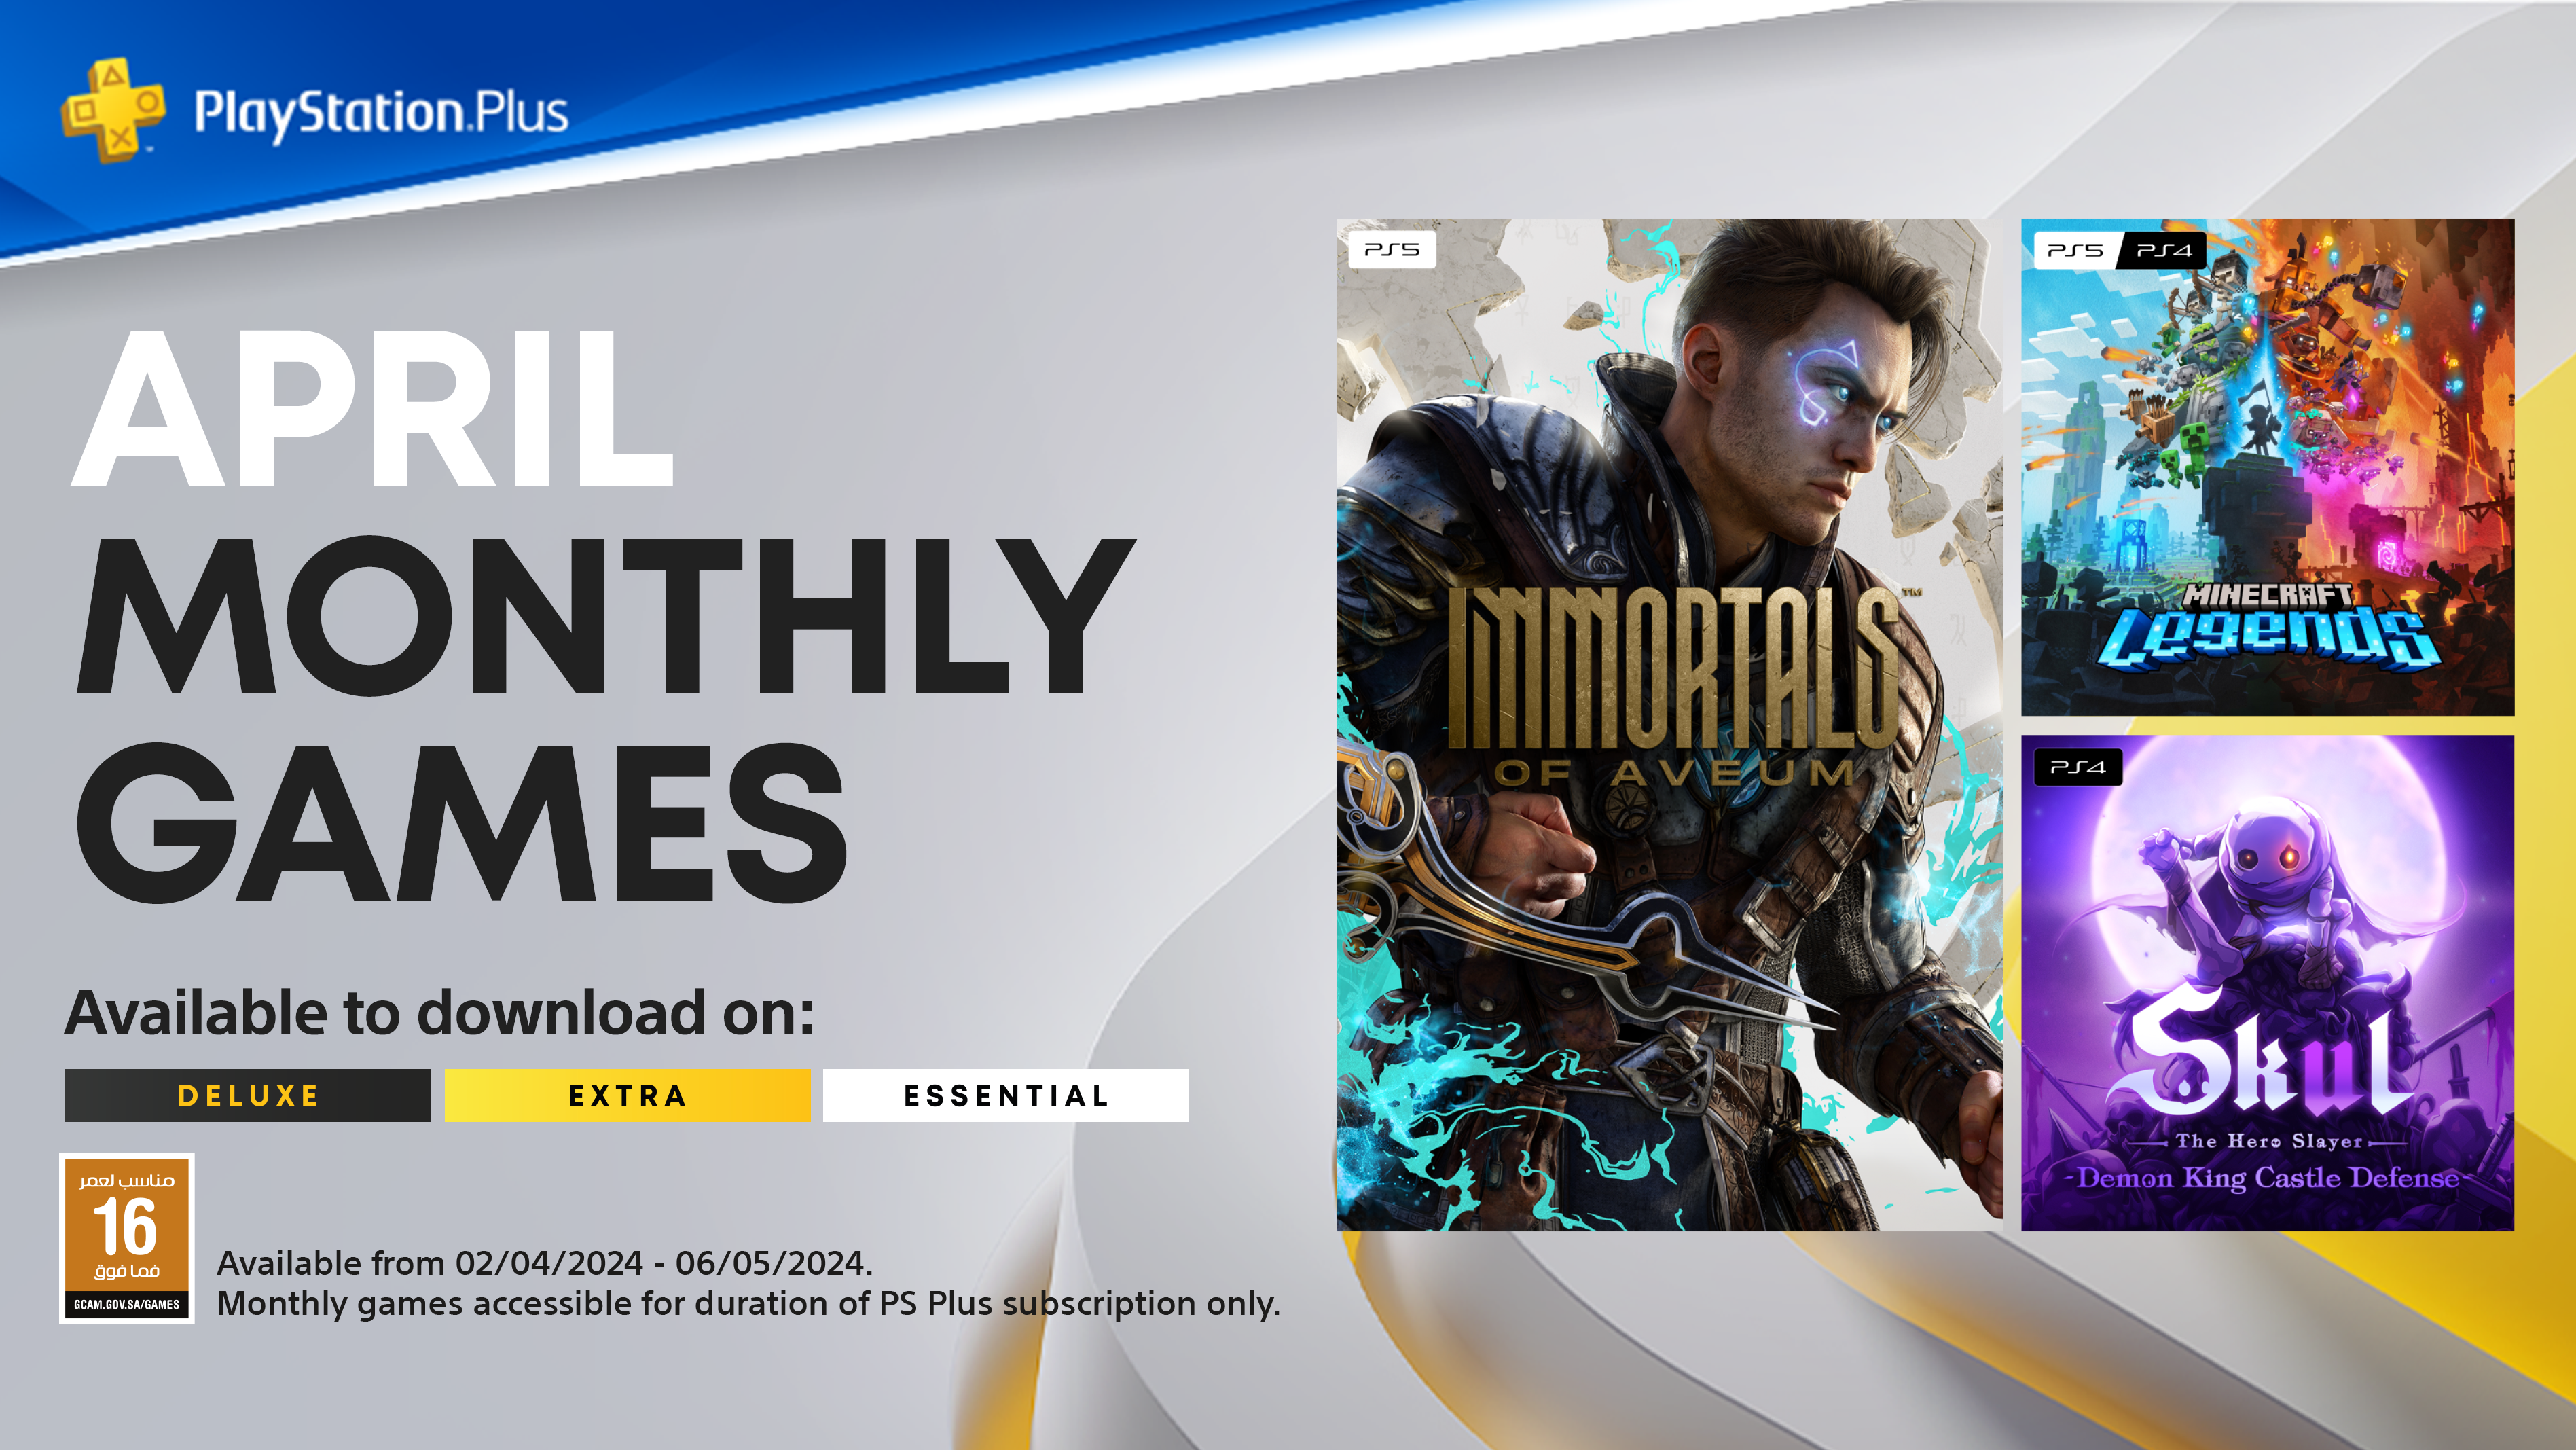 PlayStation Plus - Free Monthly Games - April